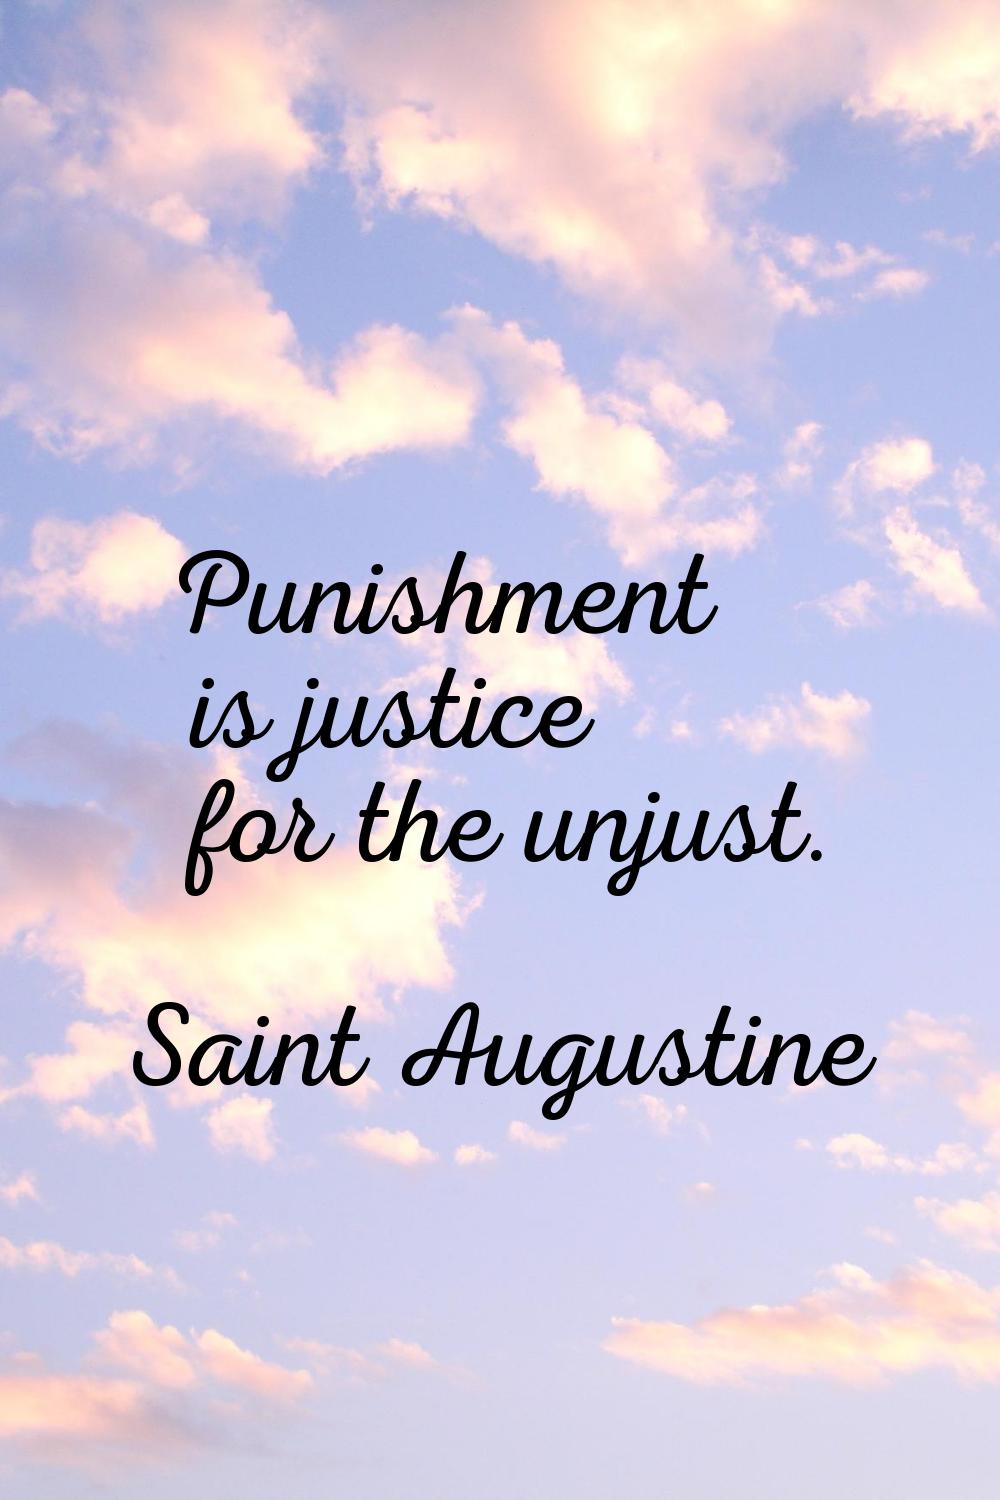 Punishment is justice for the unjust.